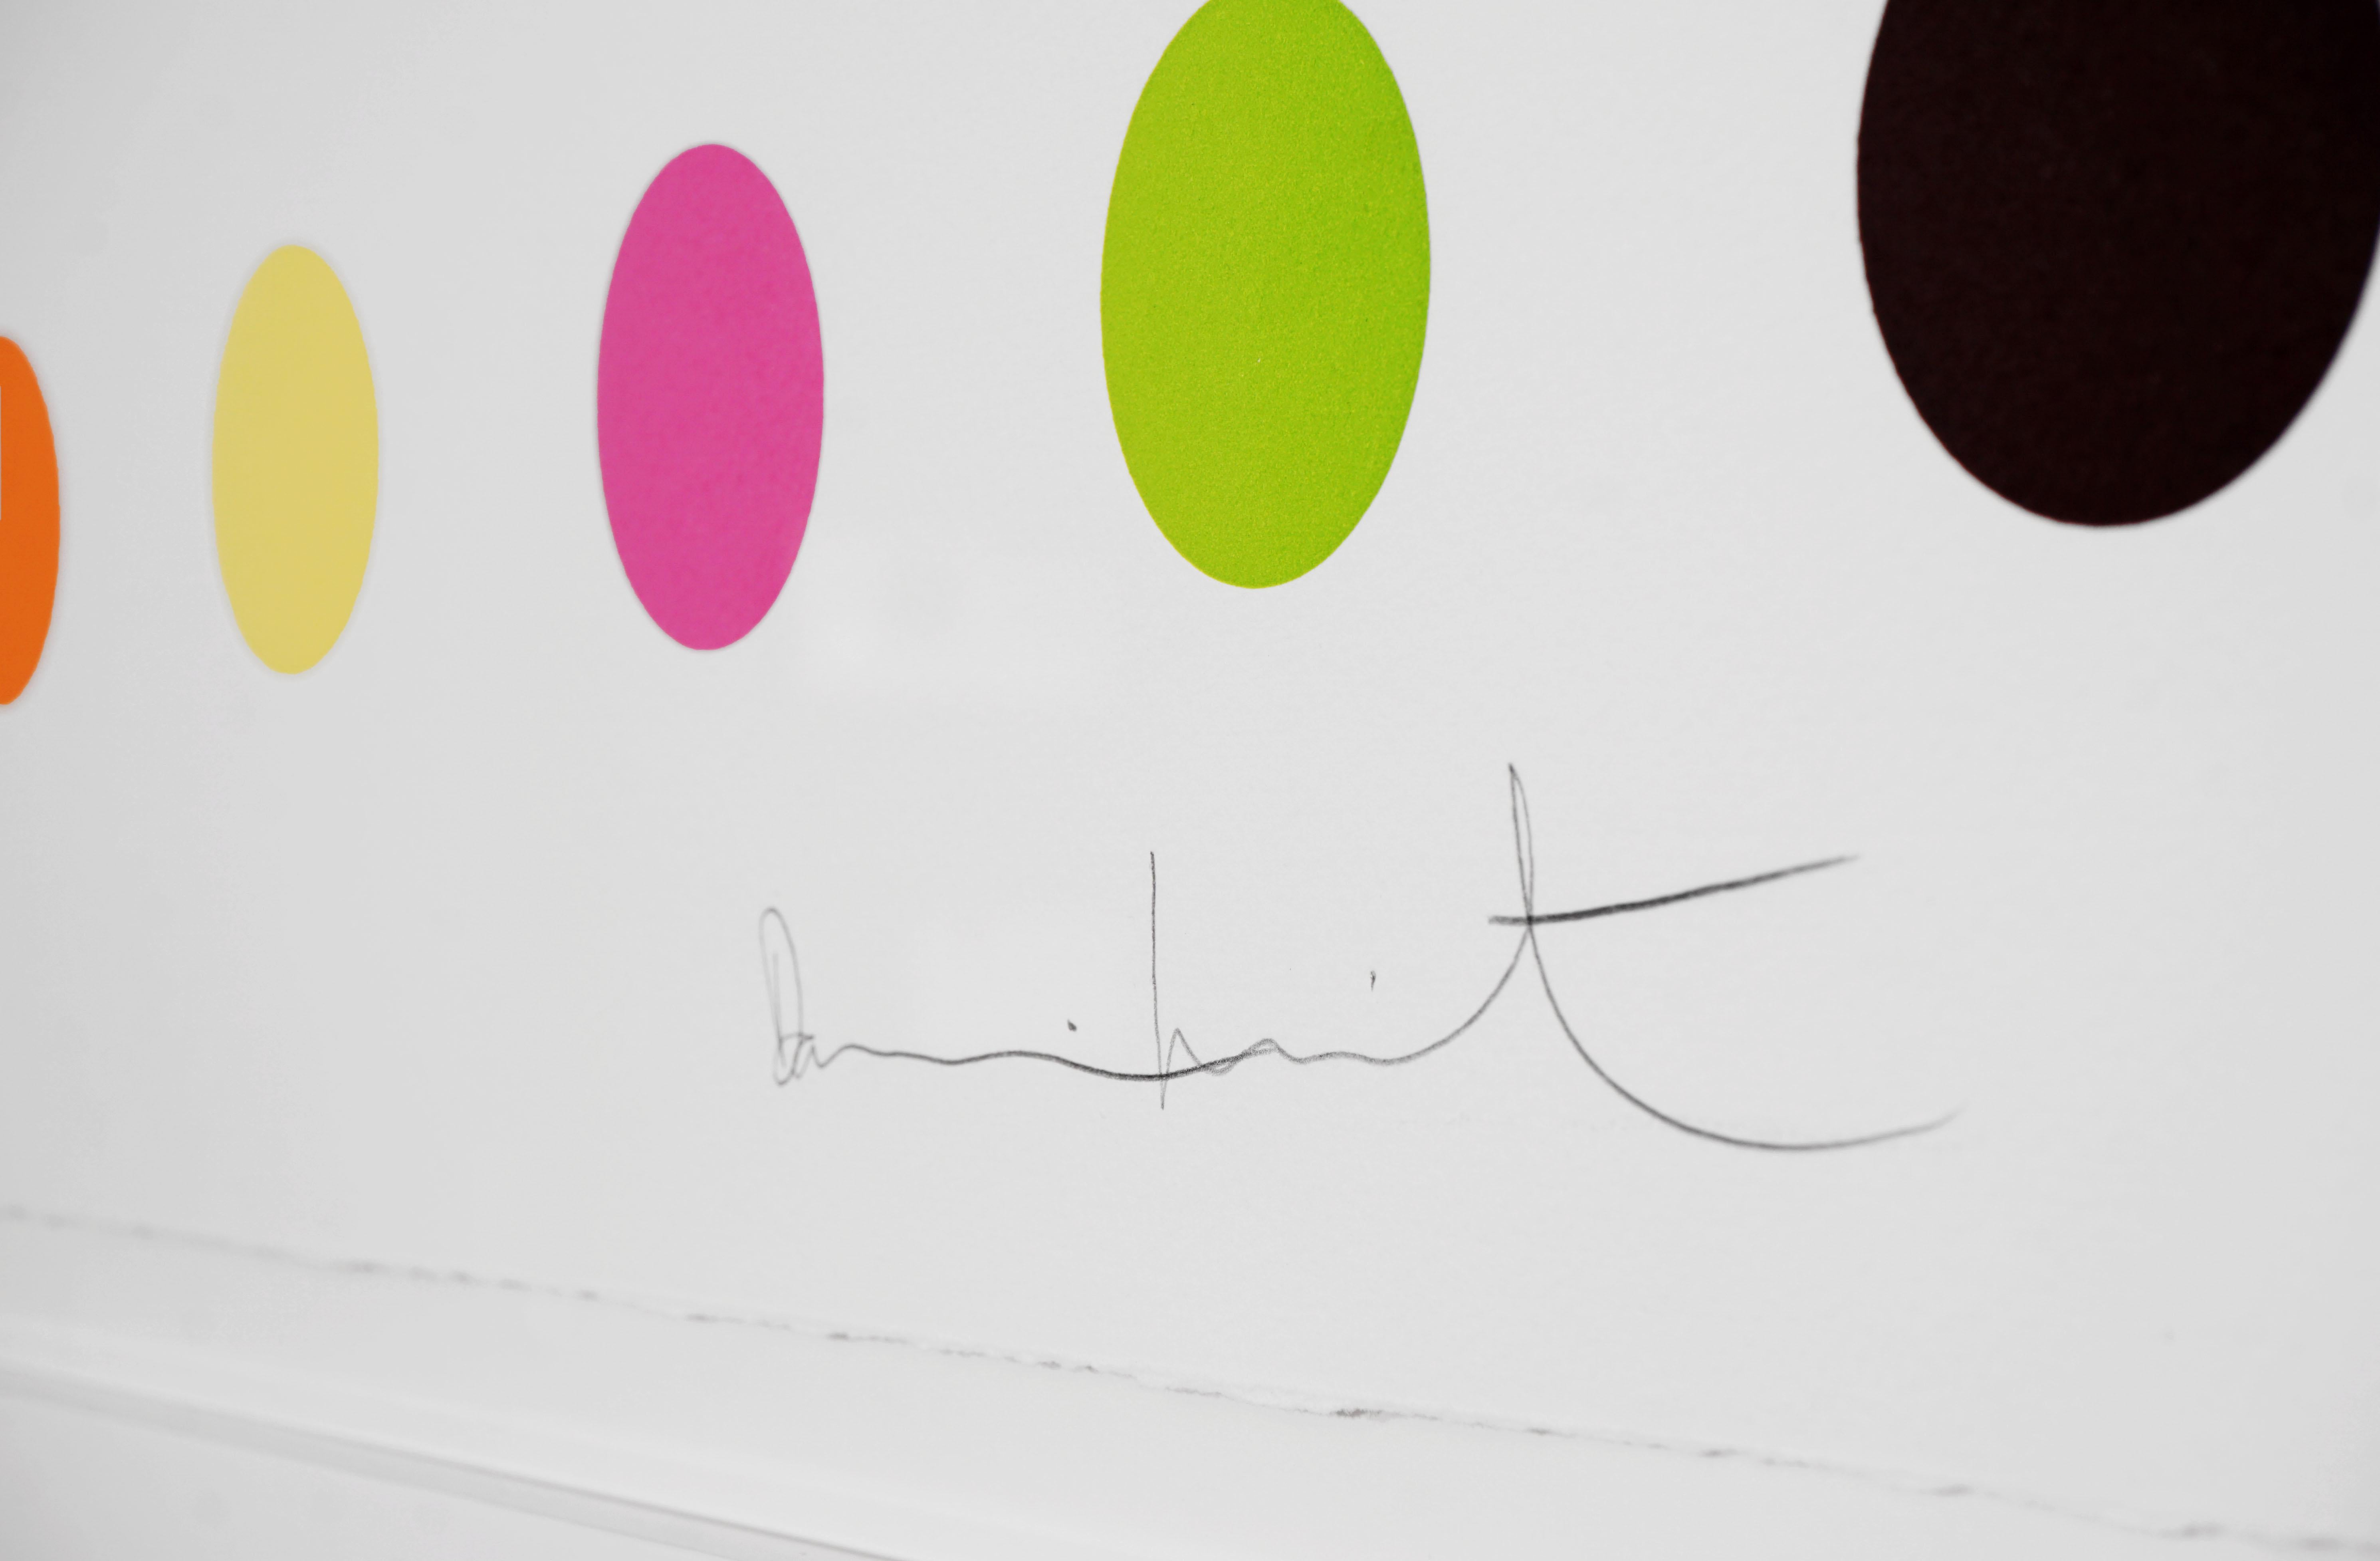 Horizontal Spots by Damien Hirst is a woodcut in his signature, bright color palette formed with series unique colors. This exquisite piece is created in a limited edition of 55. Signed by the artist in pencil in the lower right corner and numbered